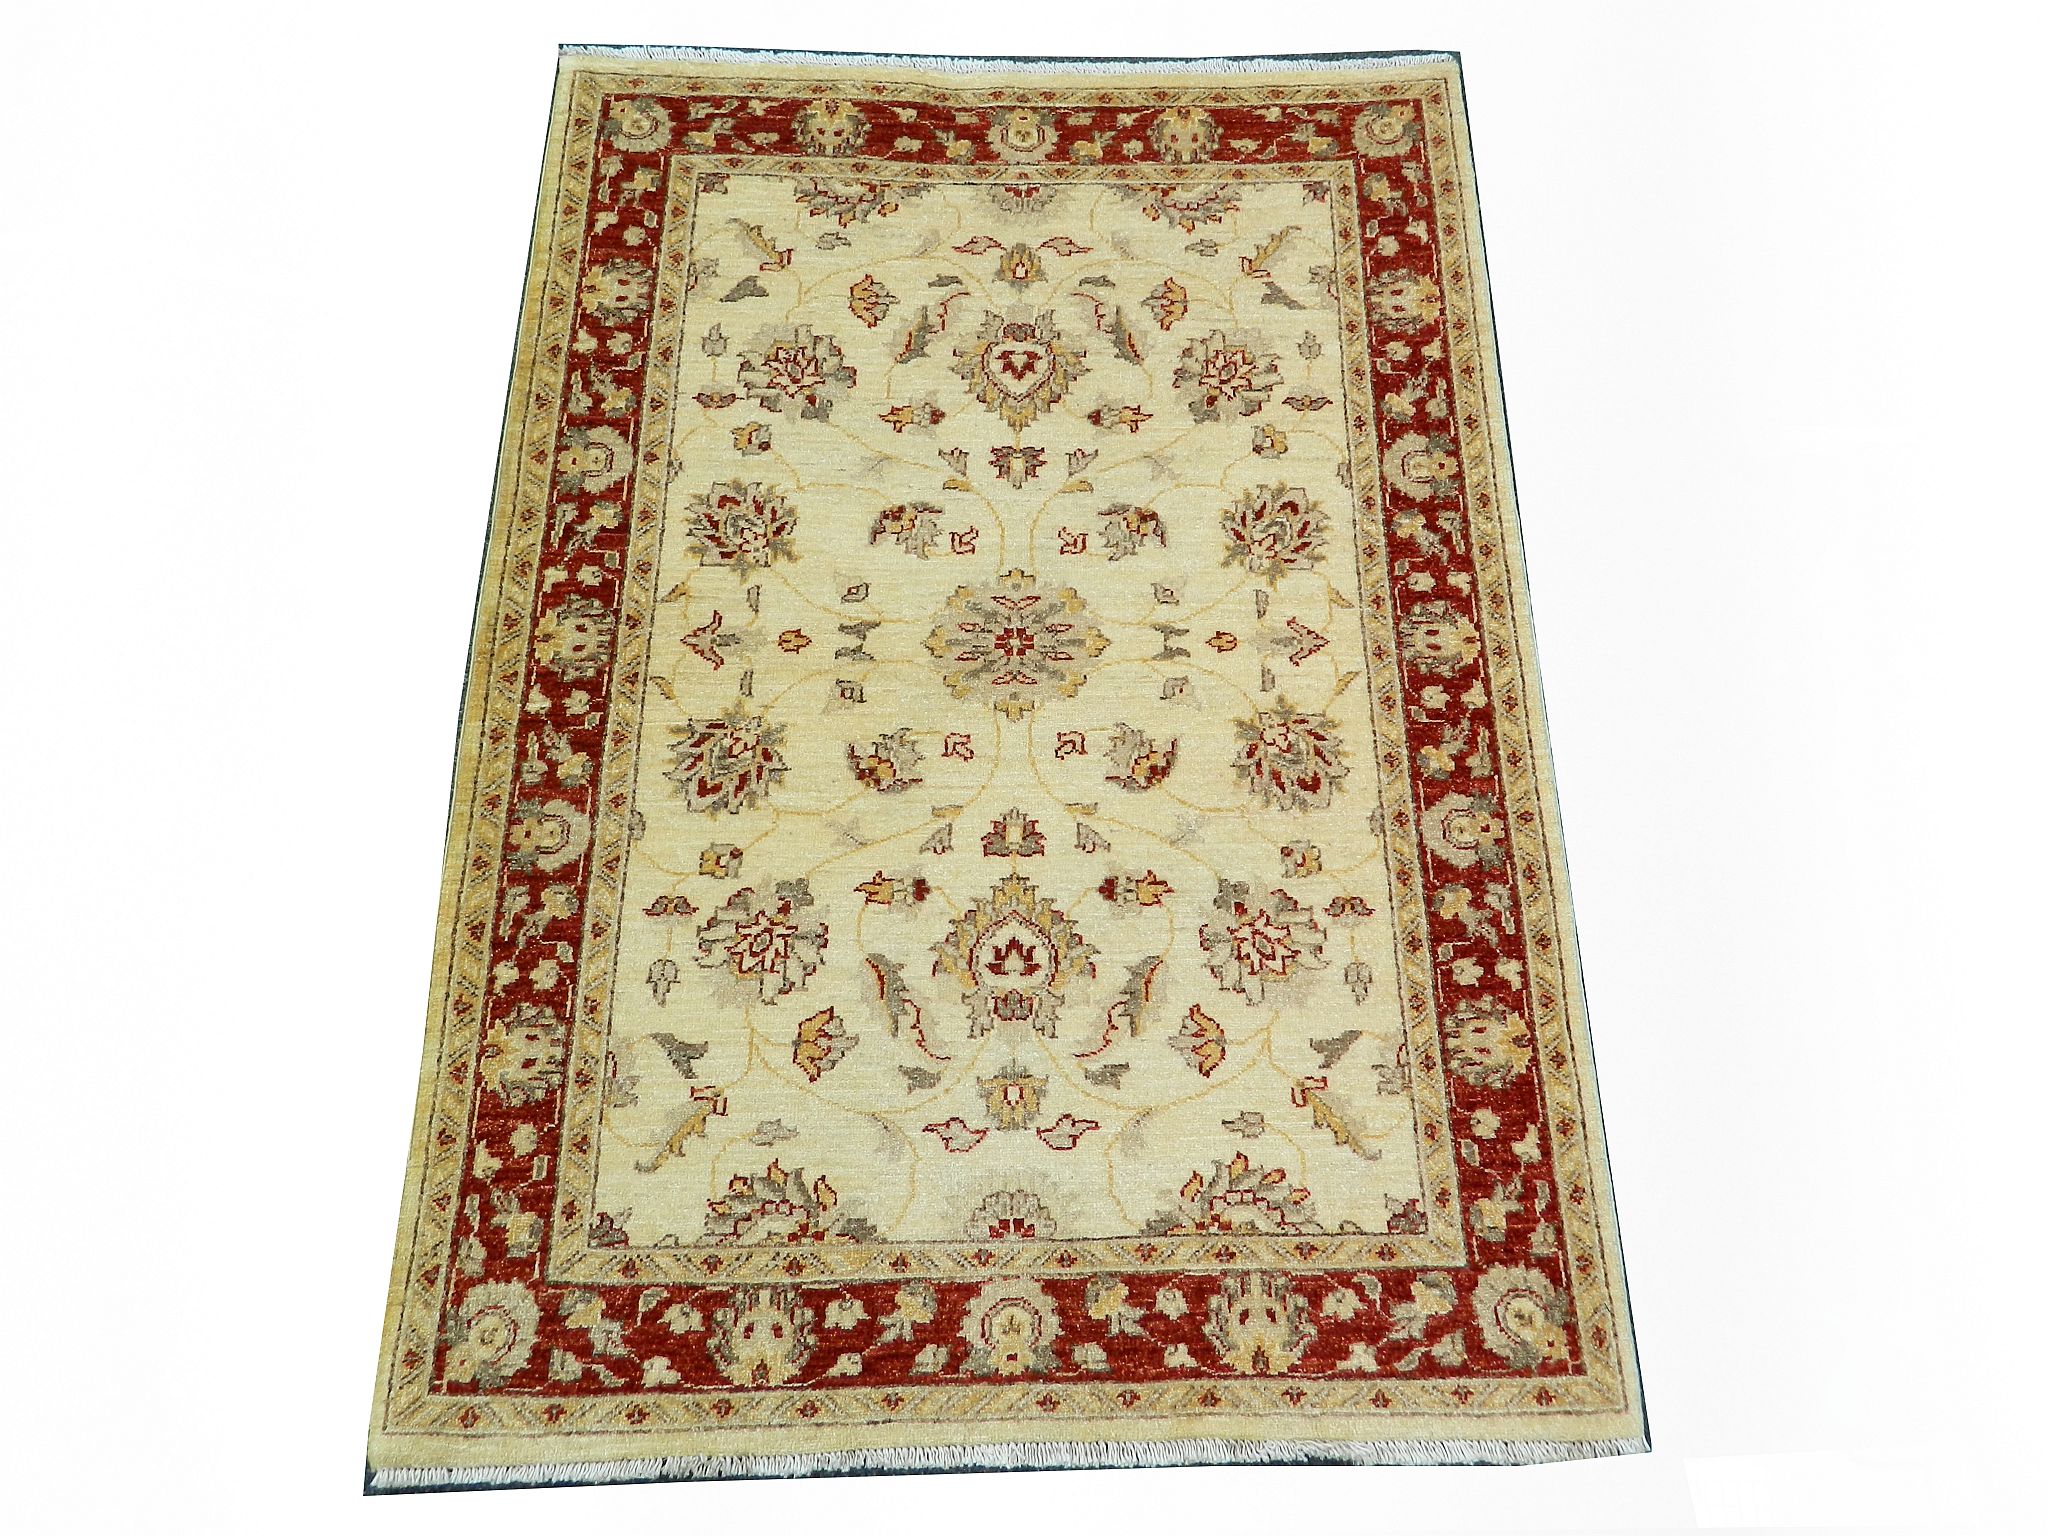 Afghan Ziegler rug, 1.65m x 1.21m, condition ratin